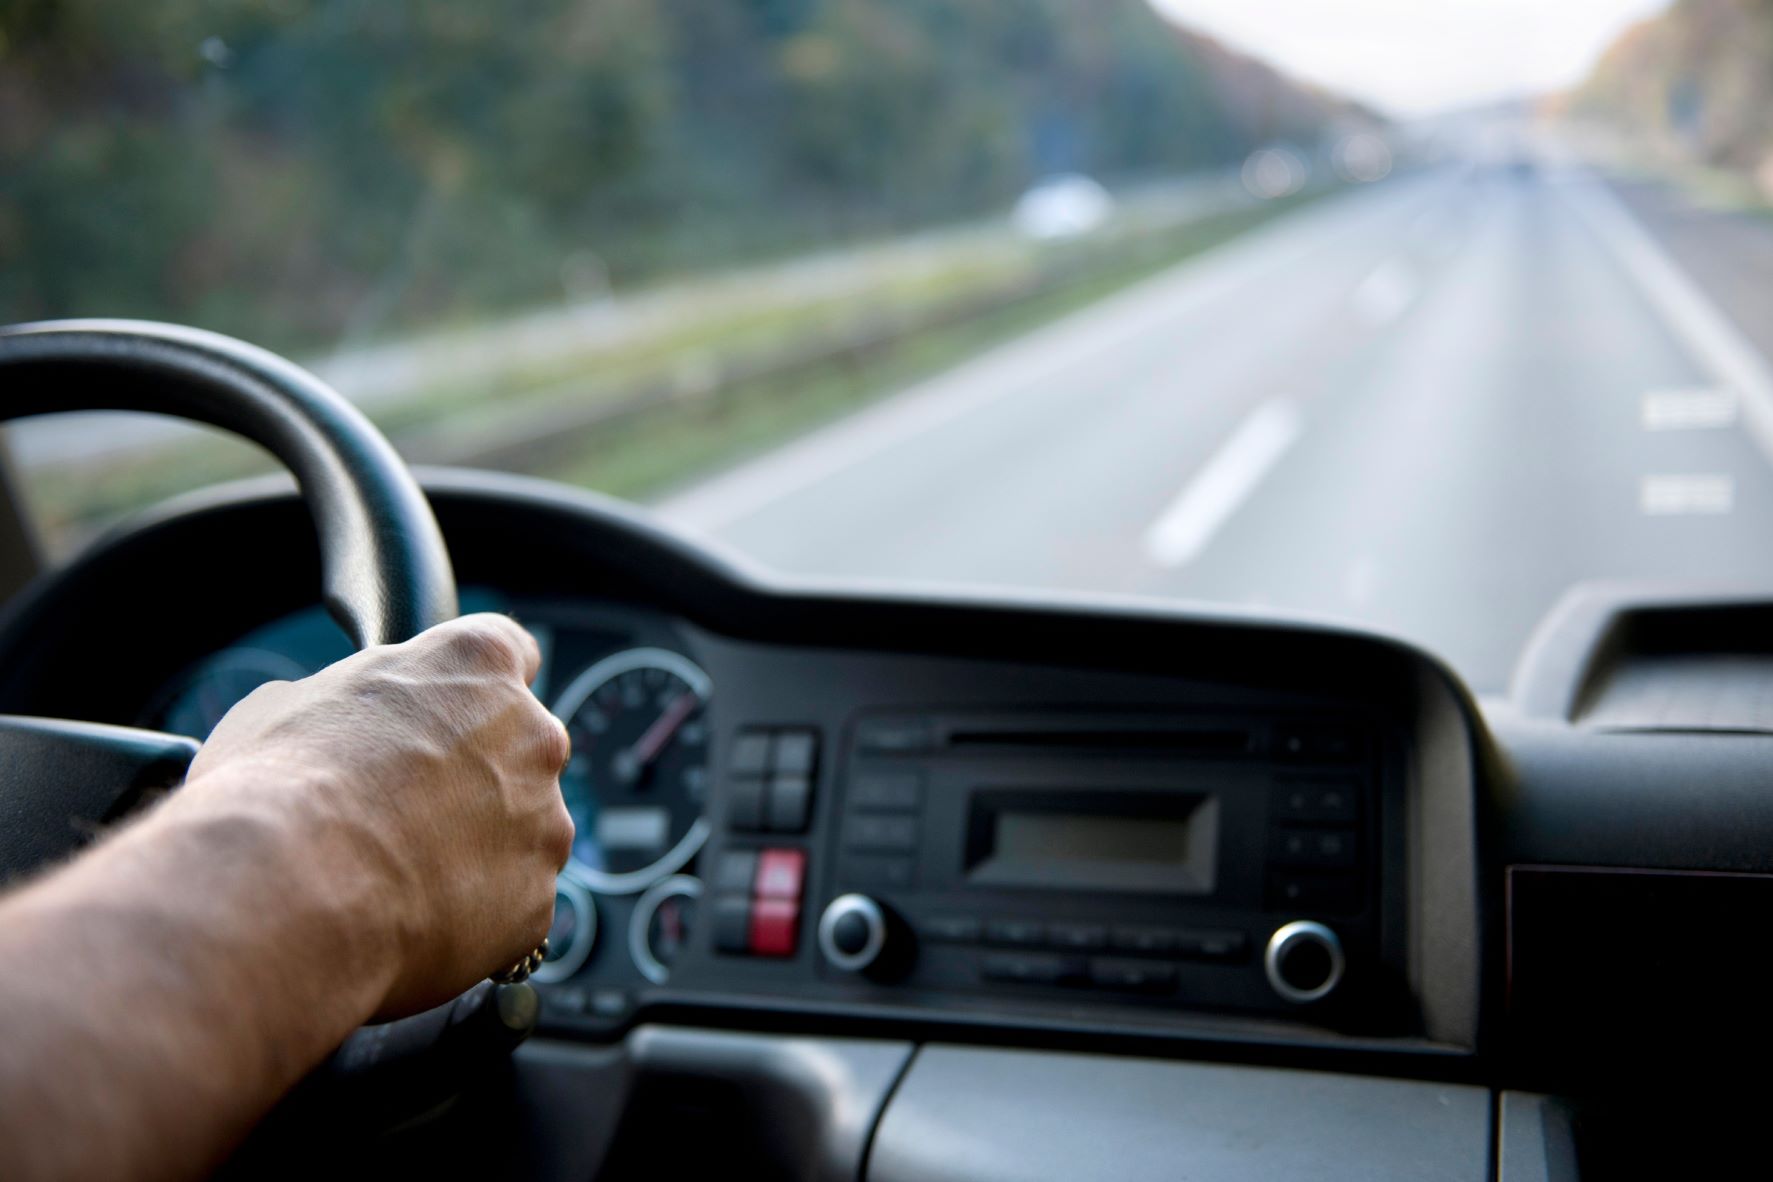 Hands on a steering wheel in a truck overlooking an open road